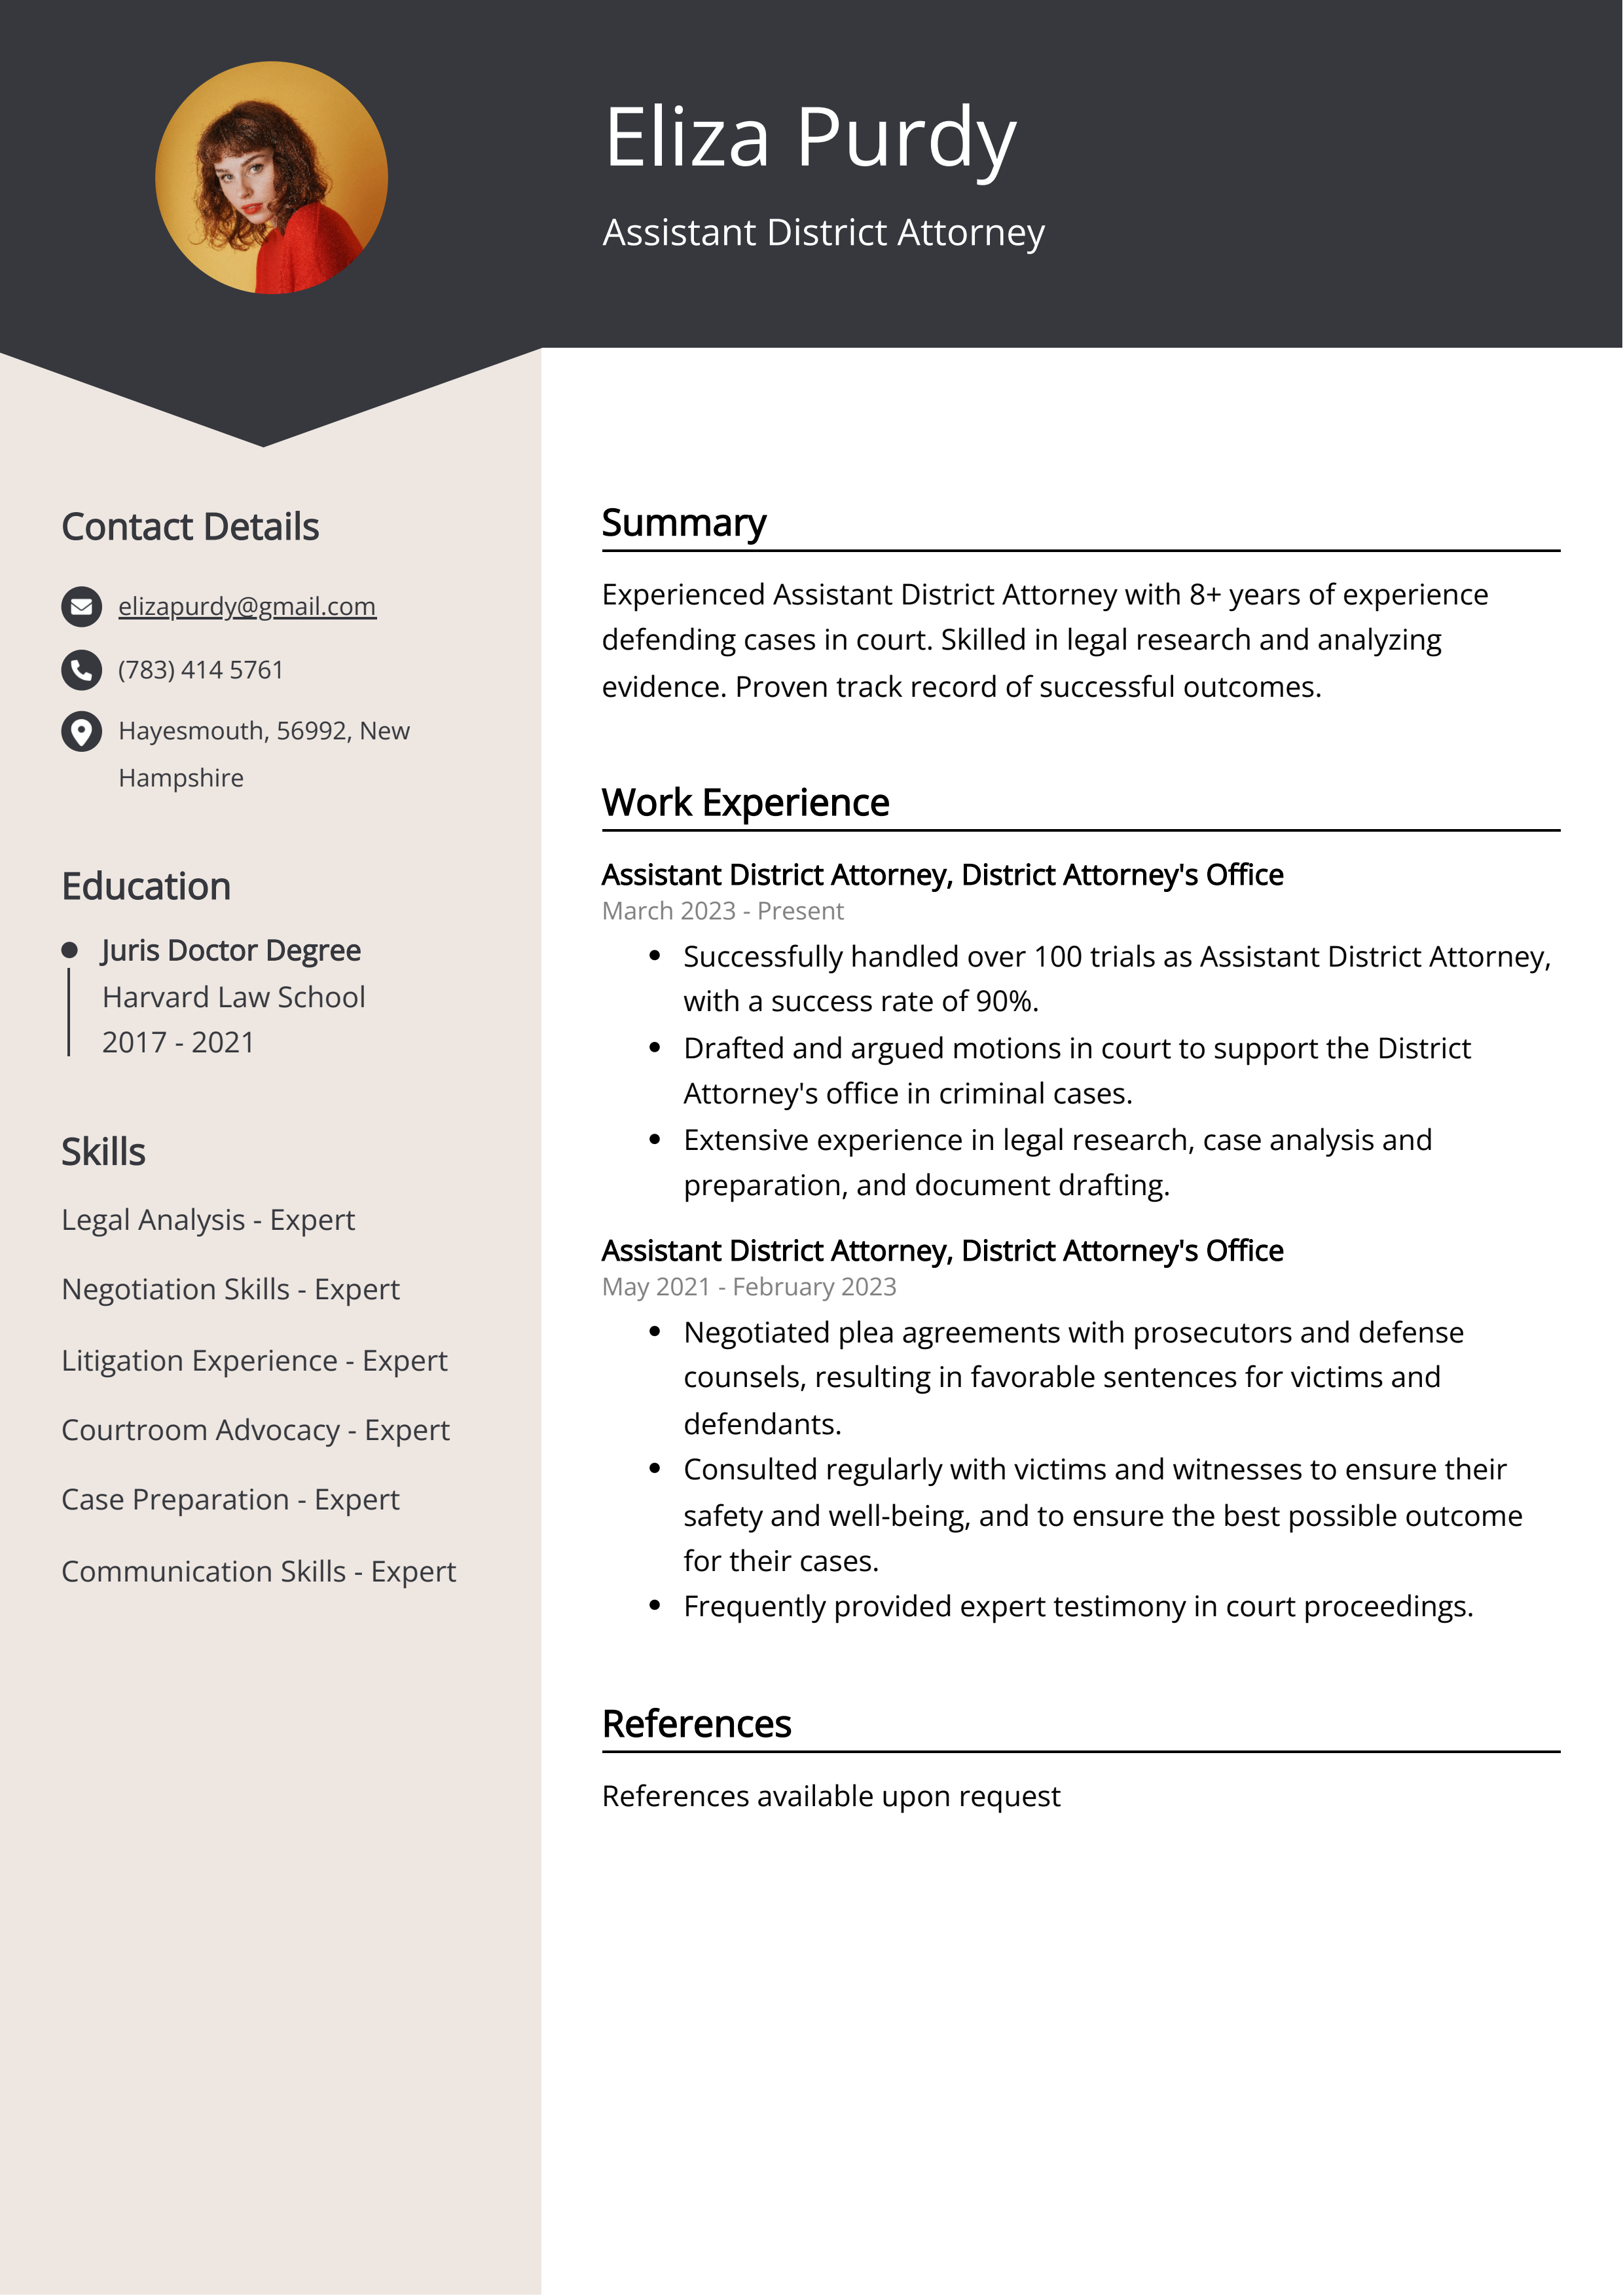 Assistant District Attorney CV Example